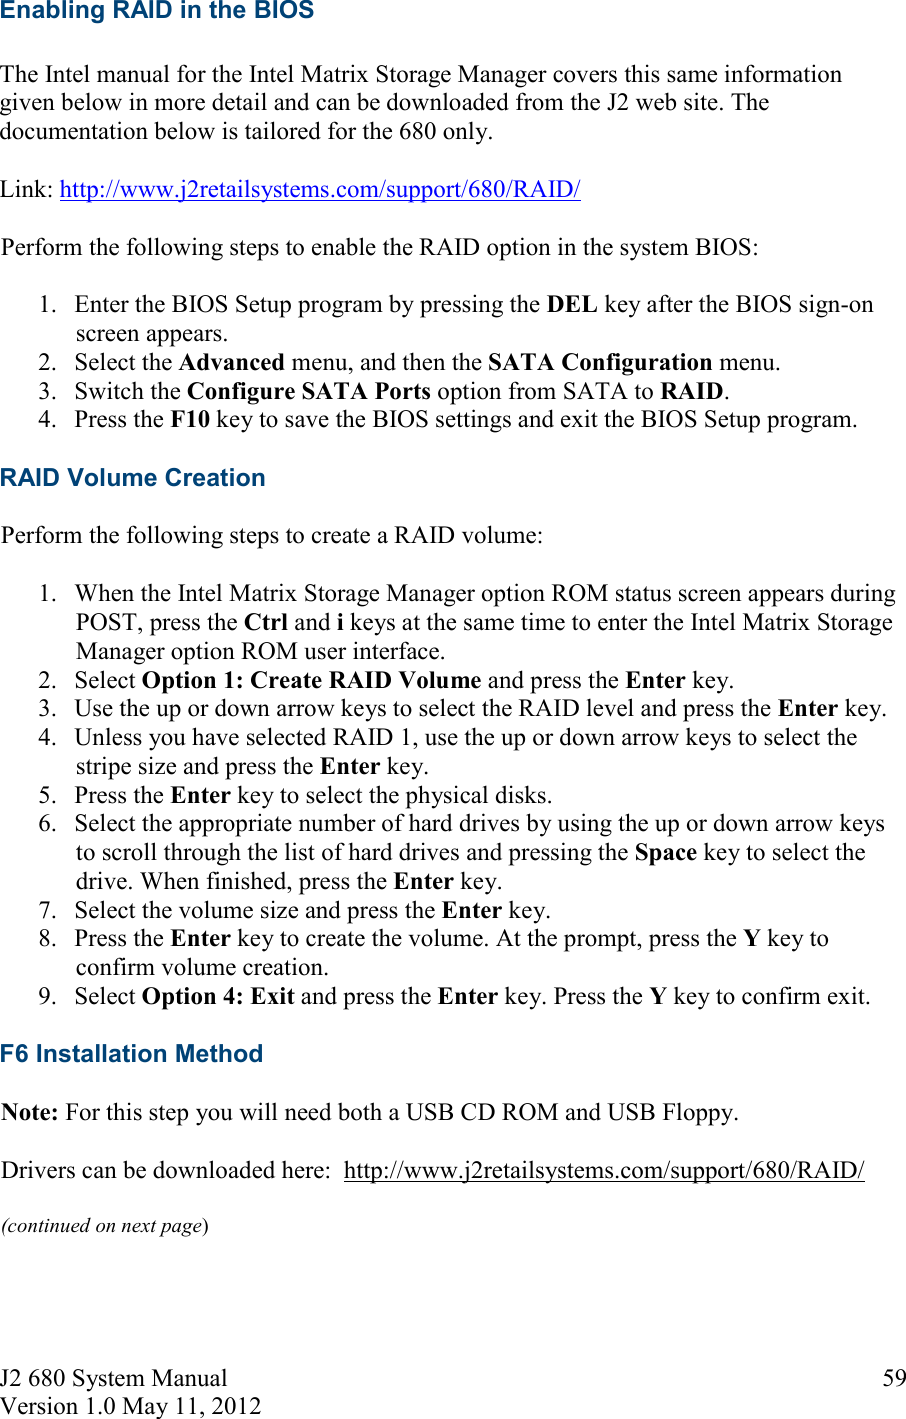 J2 680 System Manual Version 1.0 May 11, 2012     59Enabling RAID in the BIOS  The Intel manual for the Intel Matrix Storage Manager covers this same information given below in more detail and can be downloaded from the J2 web site. The documentation below is tailored for the 680 only.  Link: http://www.j2retailsystems.com/support/680/RAID/ Perform the following steps to enable the RAID option in the system BIOS: 1. Enter the BIOS Setup program by pressing the DEL key after the BIOS sign-on screen appears. 2. Select the Advanced menu, and then the SATA Configuration menu.  3. Switch the Configure SATA Ports option from SATA to RAID.  4. Press the F10 key to save the BIOS settings and exit the BIOS Setup program. RAID Volume Creation Perform the following steps to create a RAID volume: 1. When the Intel Matrix Storage Manager option ROM status screen appears during POST, press the Ctrl and i keys at the same time to enter the Intel Matrix Storage Manager option ROM user interface.  2. Select Option 1: Create RAID Volume and press the Enter key.  3. Use the up or down arrow keys to select the RAID level and press the Enter key.  4. Unless you have selected RAID 1, use the up or down arrow keys to select the stripe size and press the Enter key.  5. Press the Enter key to select the physical disks.  6. Select the appropriate number of hard drives by using the up or down arrow keys to scroll through the list of hard drives and pressing the Space key to select the drive. When finished, press the Enter key.  7. Select the volume size and press the Enter key.  8. Press the Enter key to create the volume. At the prompt, press the Y key to confirm volume creation.  9. Select Option 4: Exit and press the Enter key. Press the Y key to confirm exit.  F6 Installation Method Note: For this step you will need both a USB CD ROM and USB Floppy.  Drivers can be downloaded here:  http://www.j2retailsystems.com/support/680/RAID/ (continued on next page)  